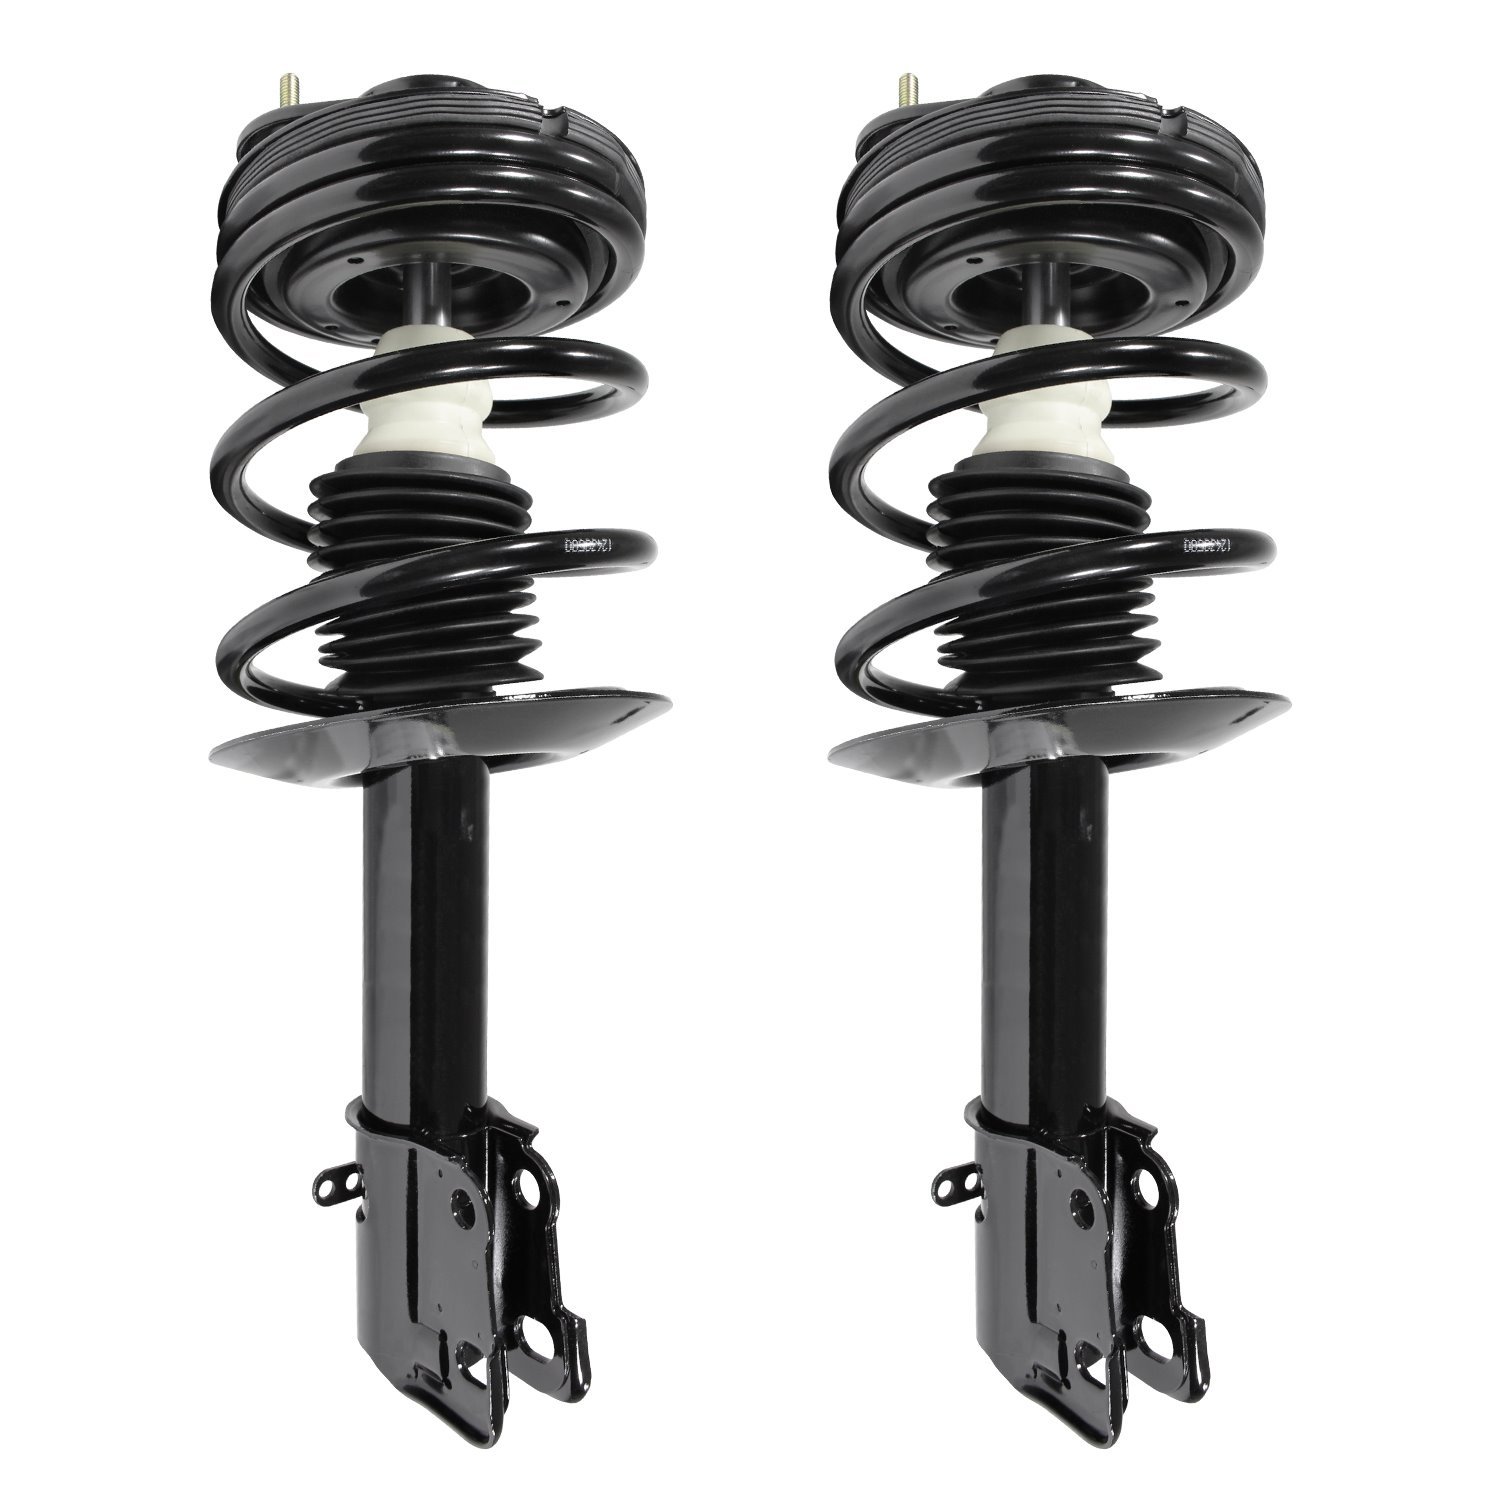 2-11240-001 Suspension Strut & Coil Spring Assembly Set Fits Select Dodge Neon, Plymouth Neon